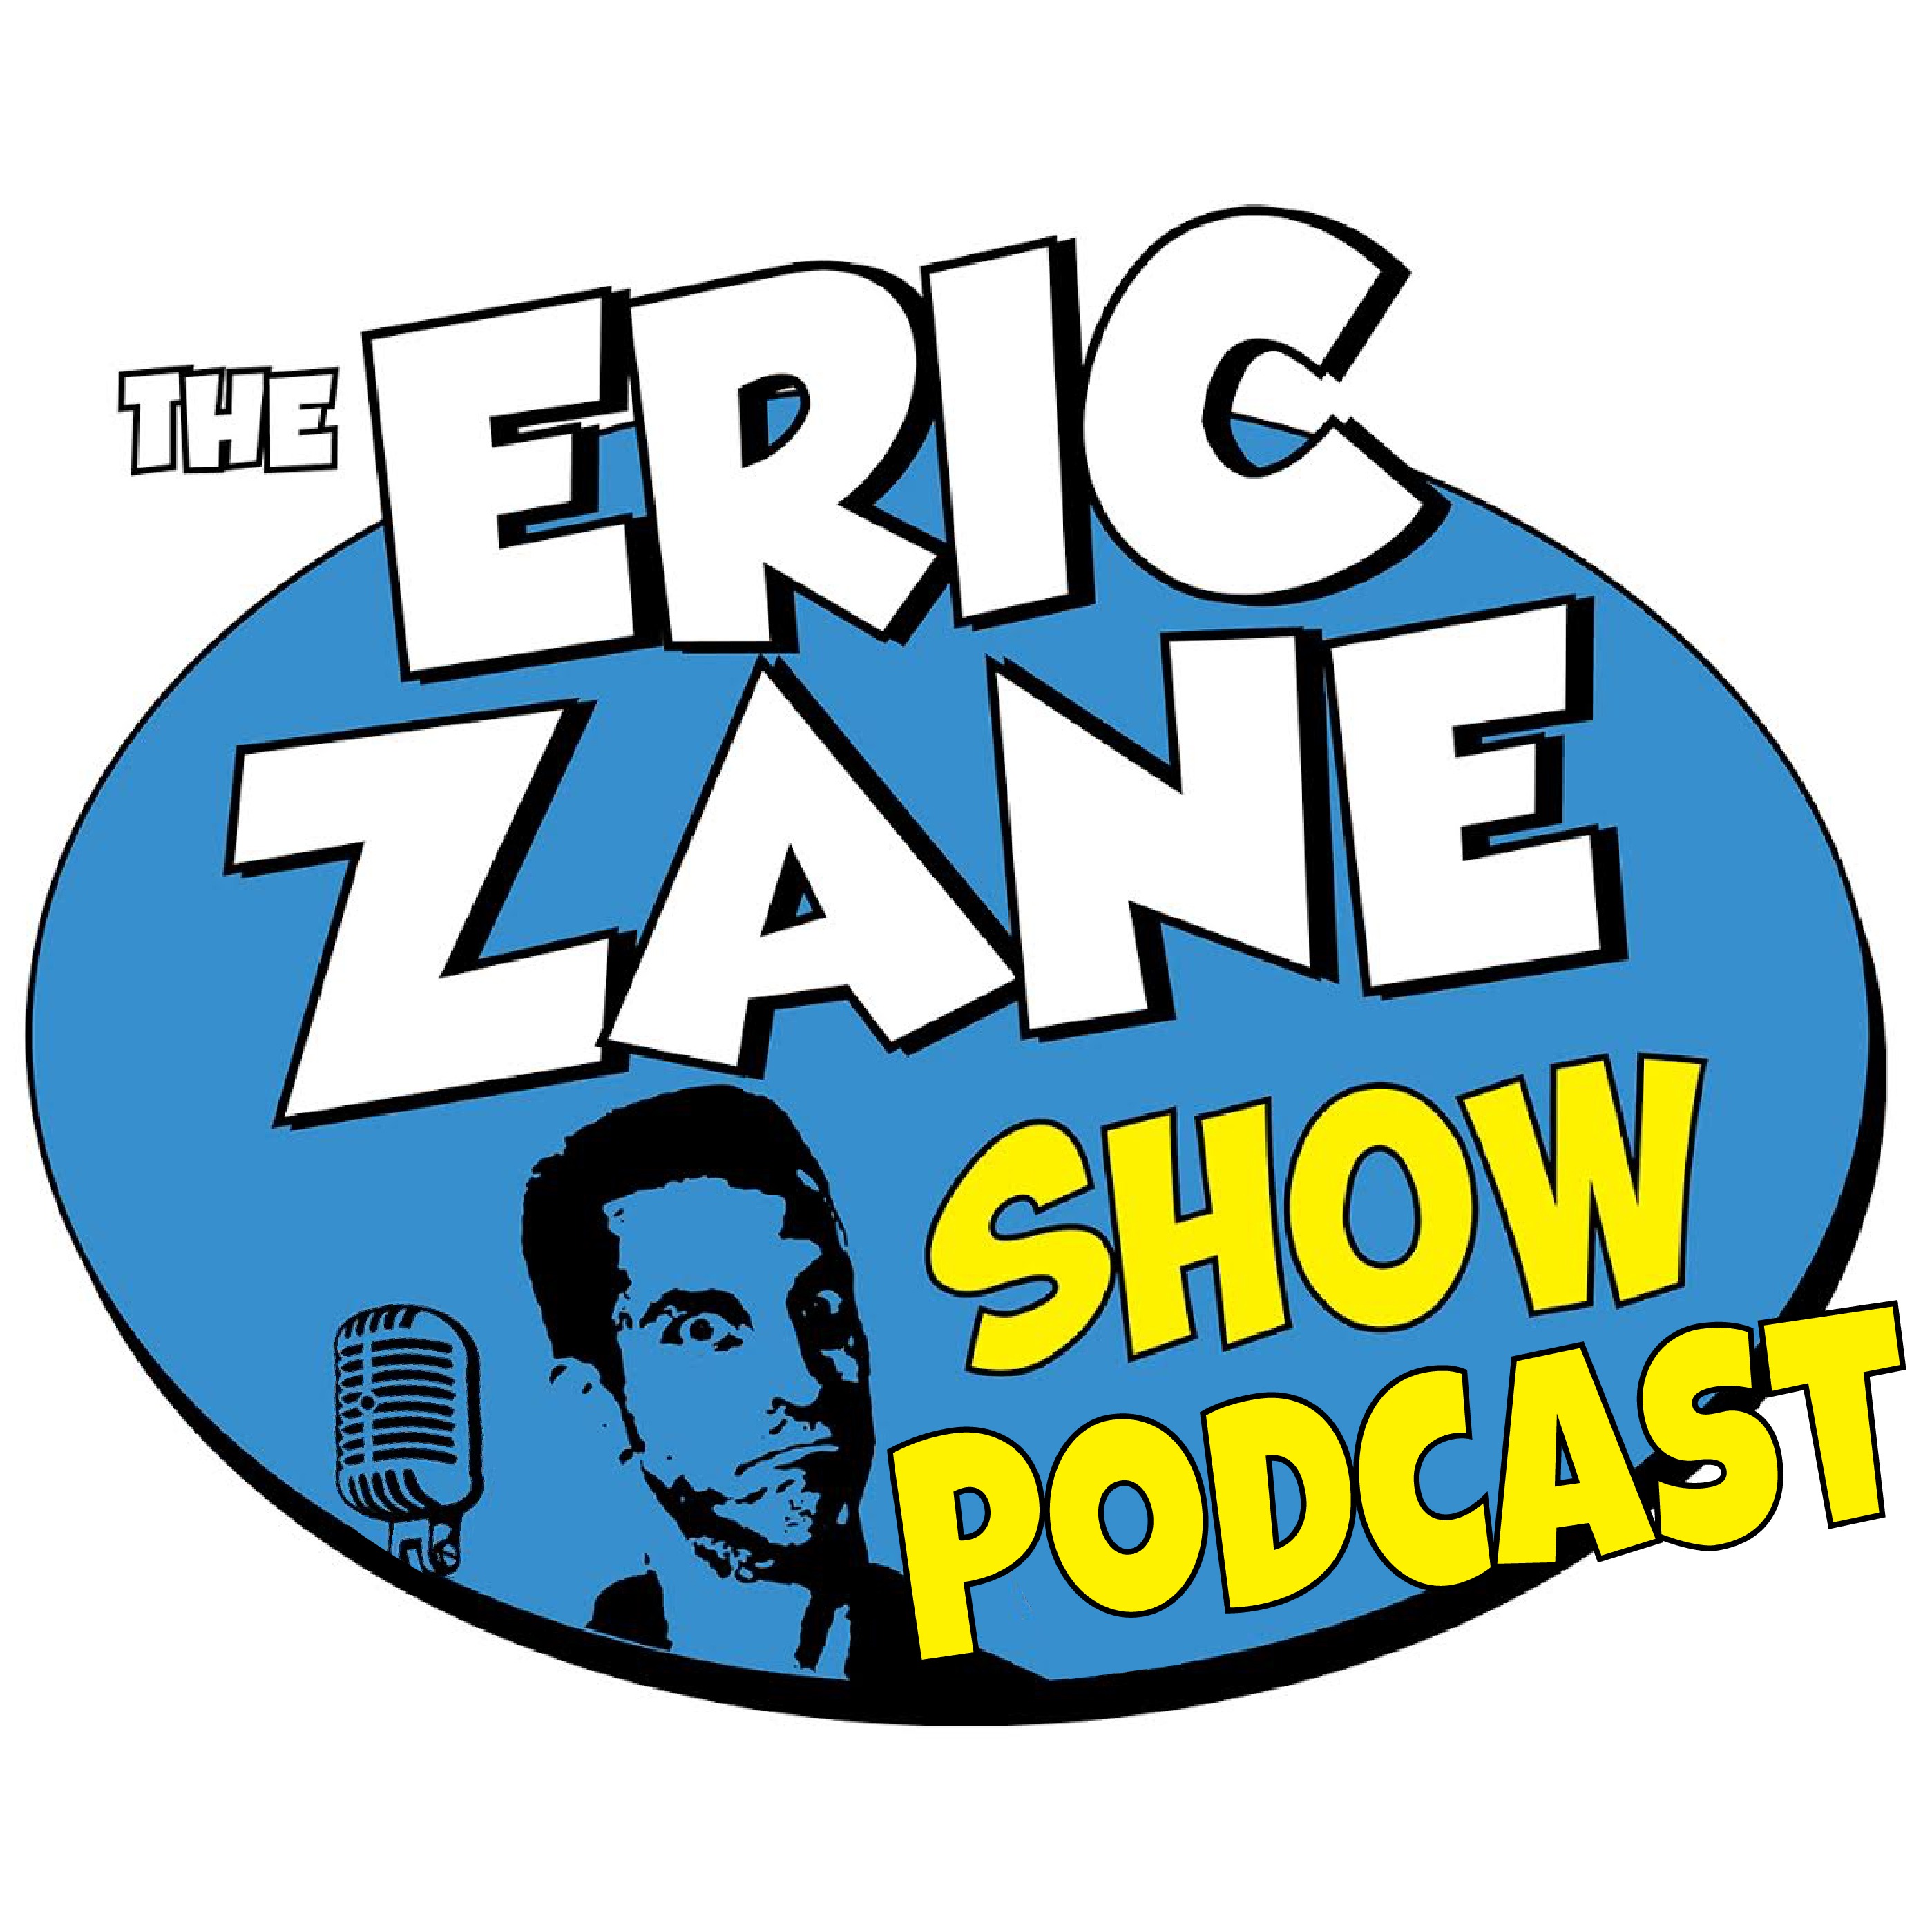 Eric Zane Show Podcast 958 - Brittney Griner if free and stupid people are angry